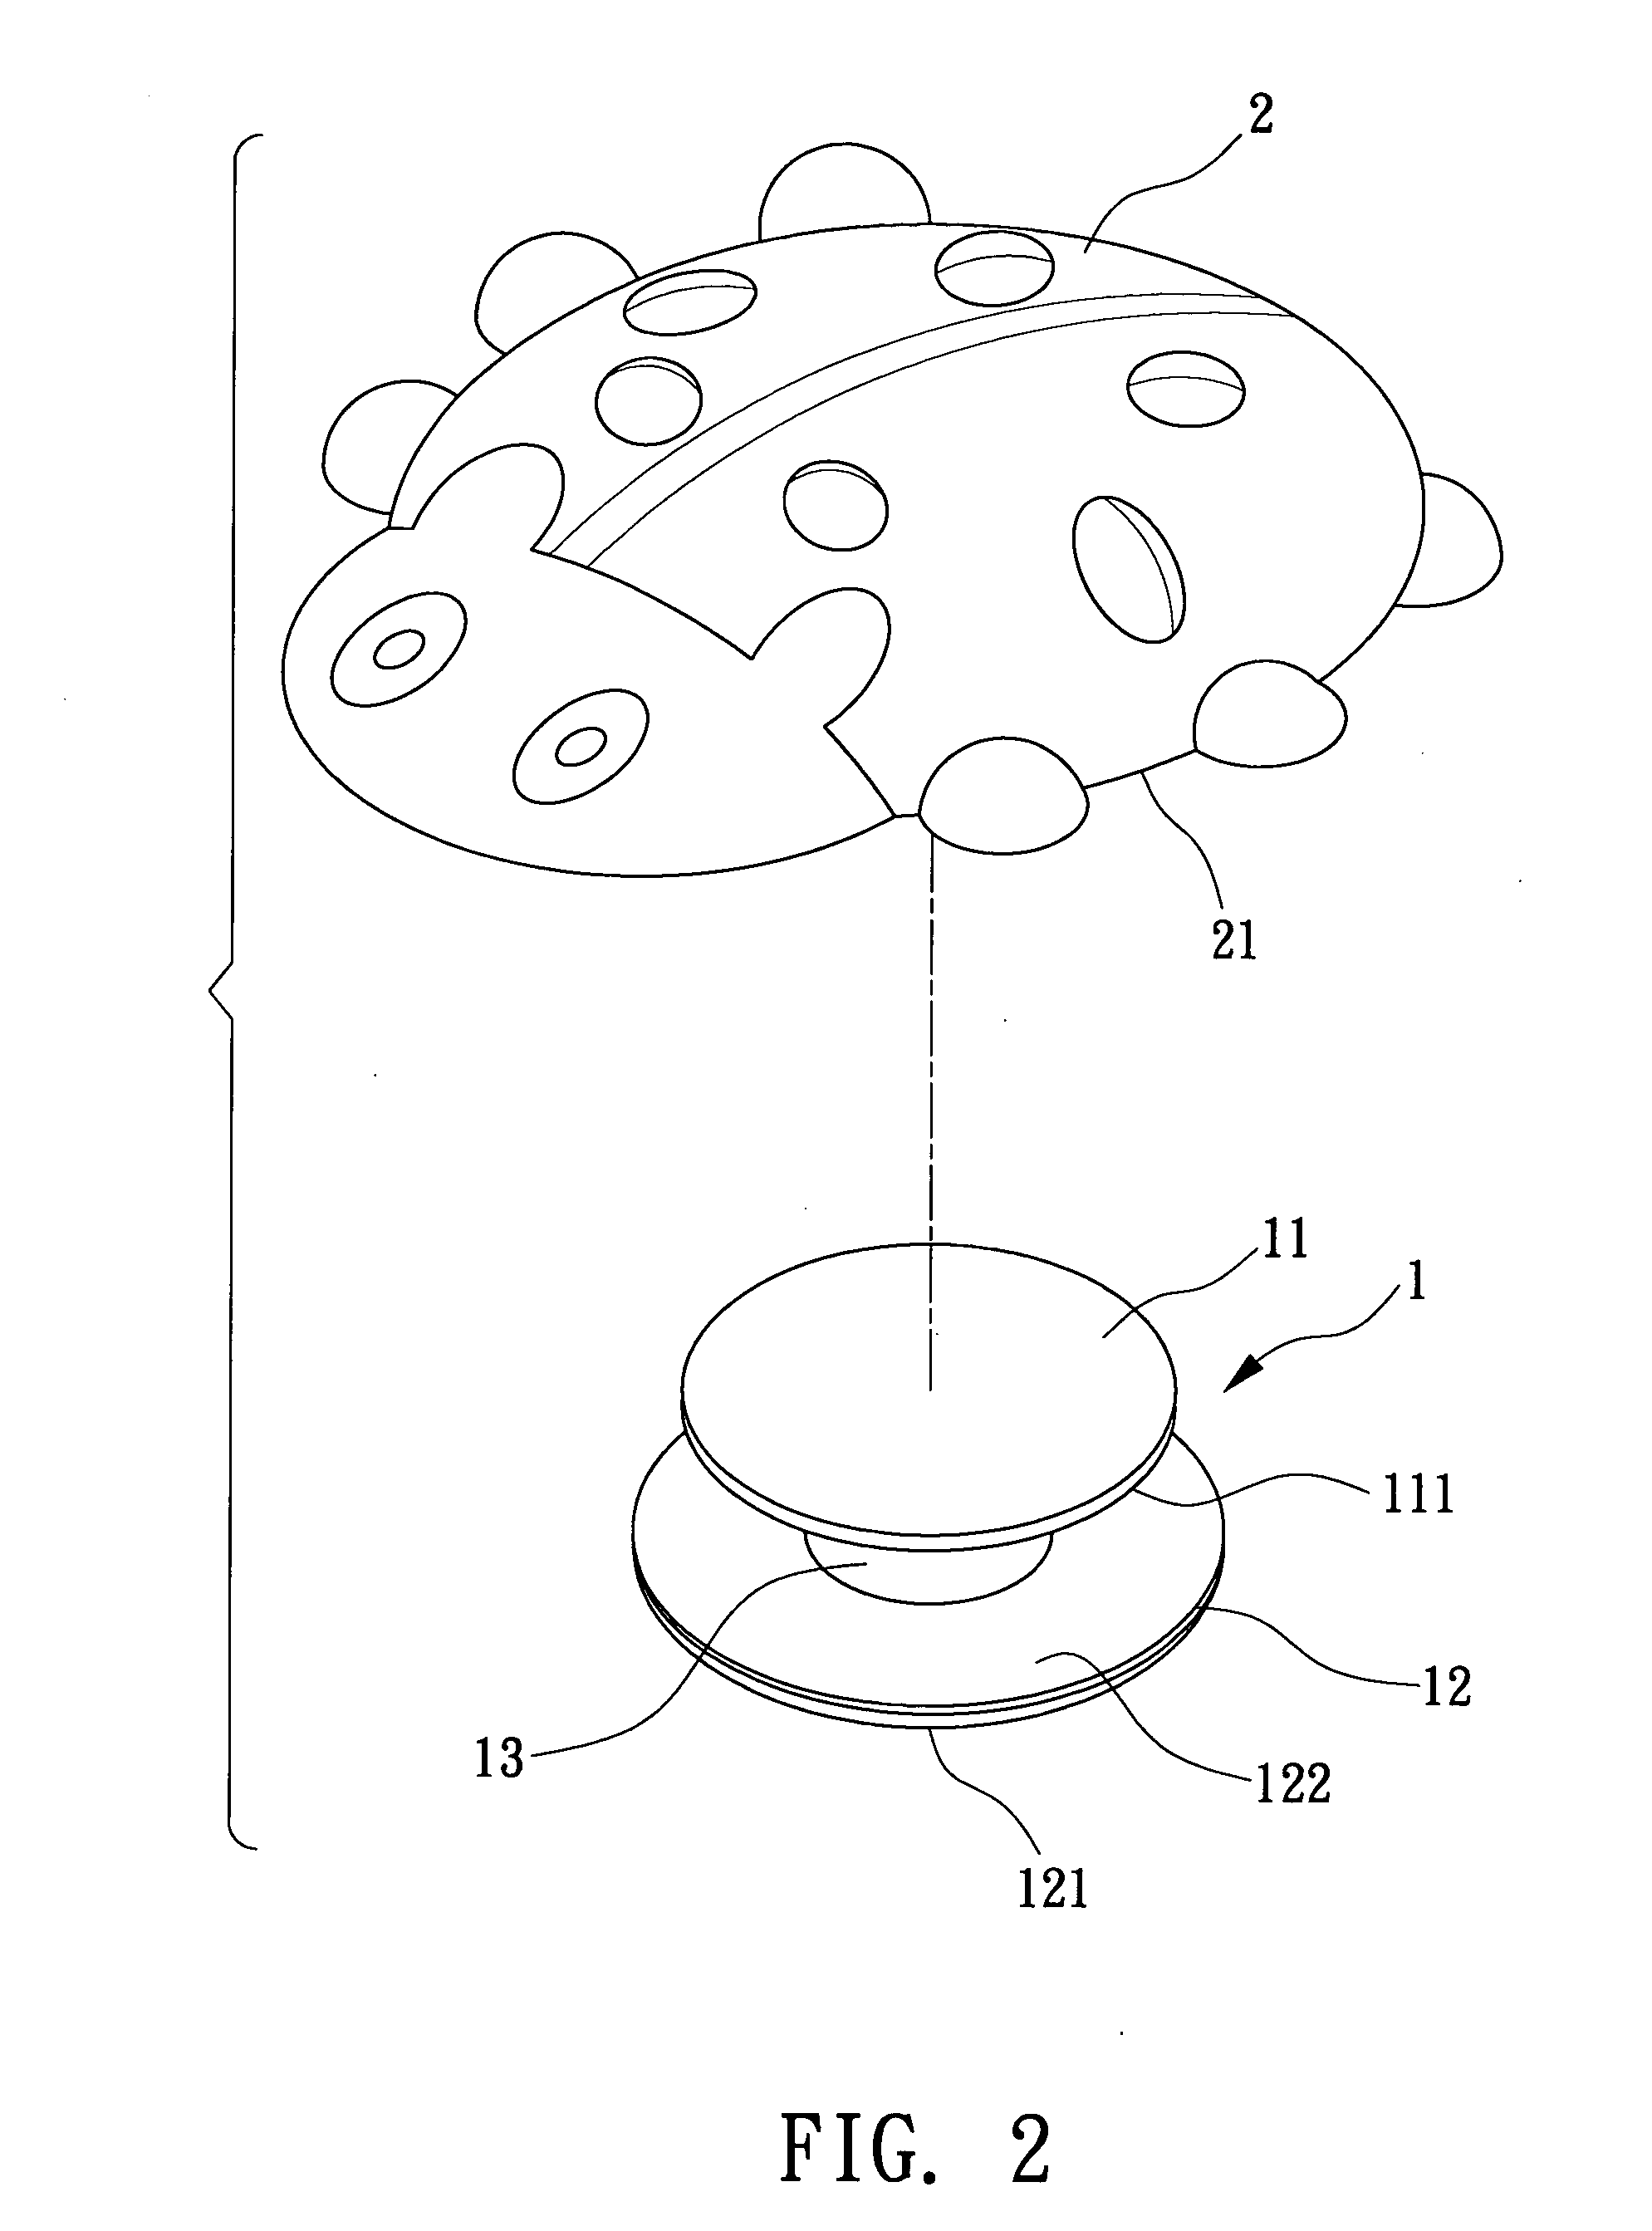 Decorative object connectable to a connected object